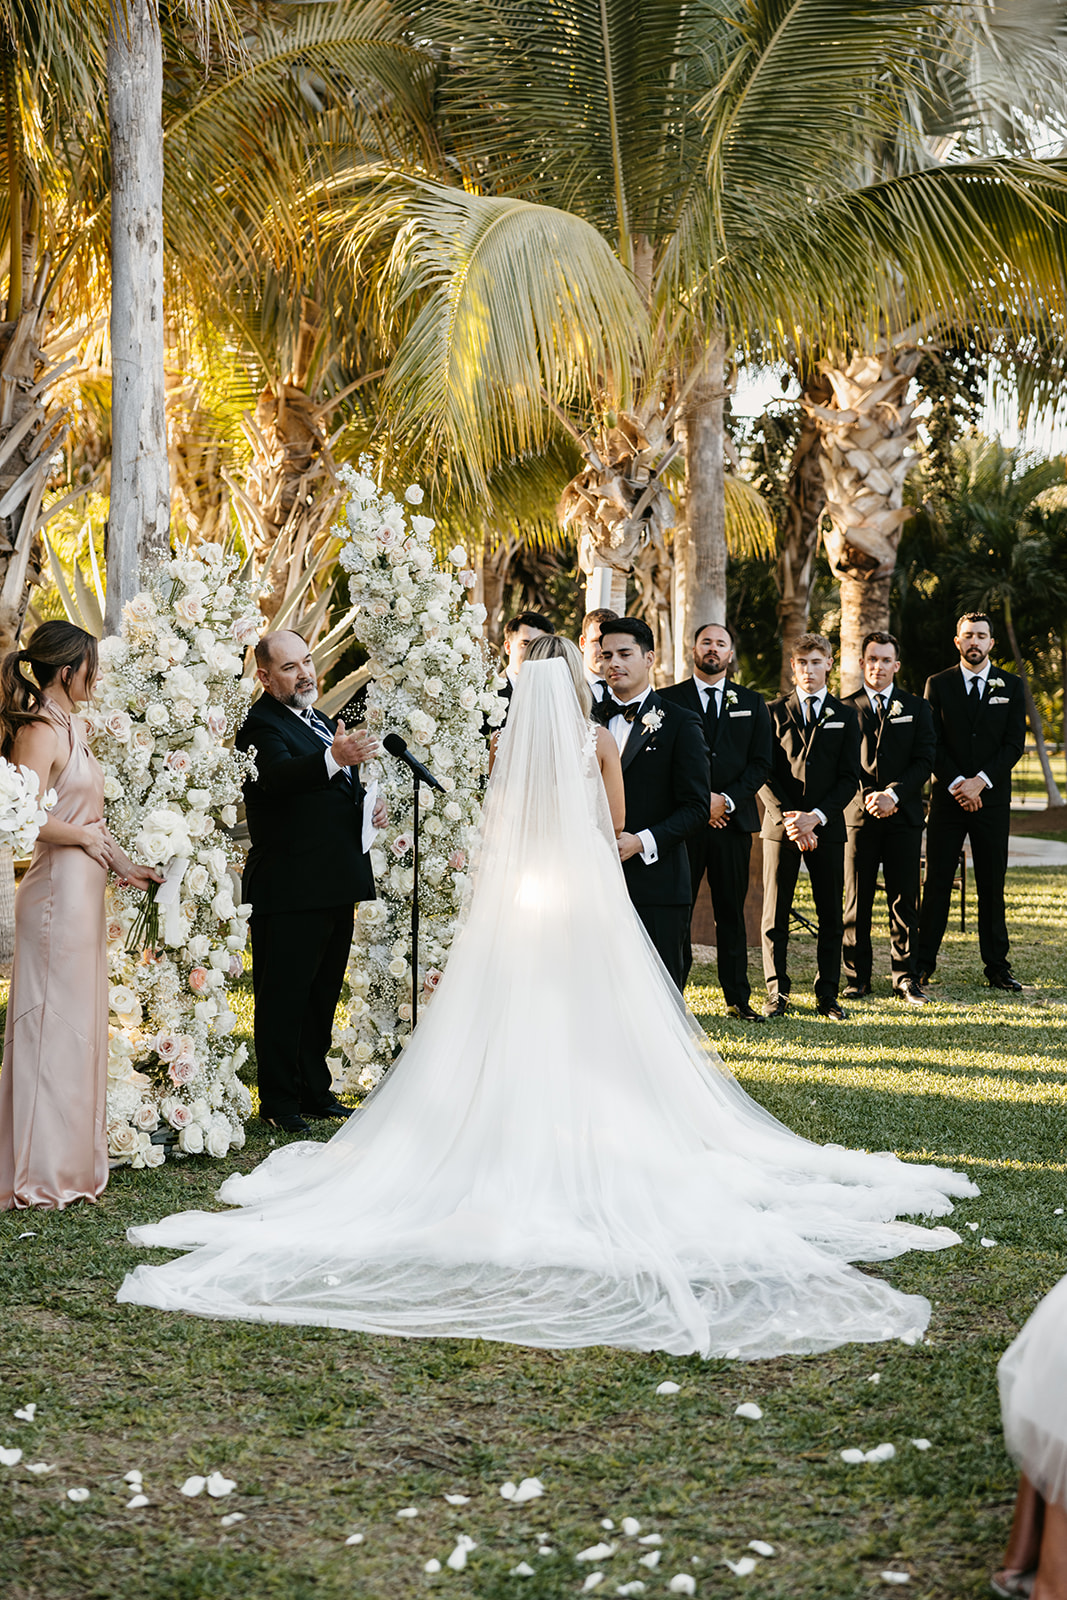 Wedding Ceremony at Acre resort in Cabo San Lucas Mexico